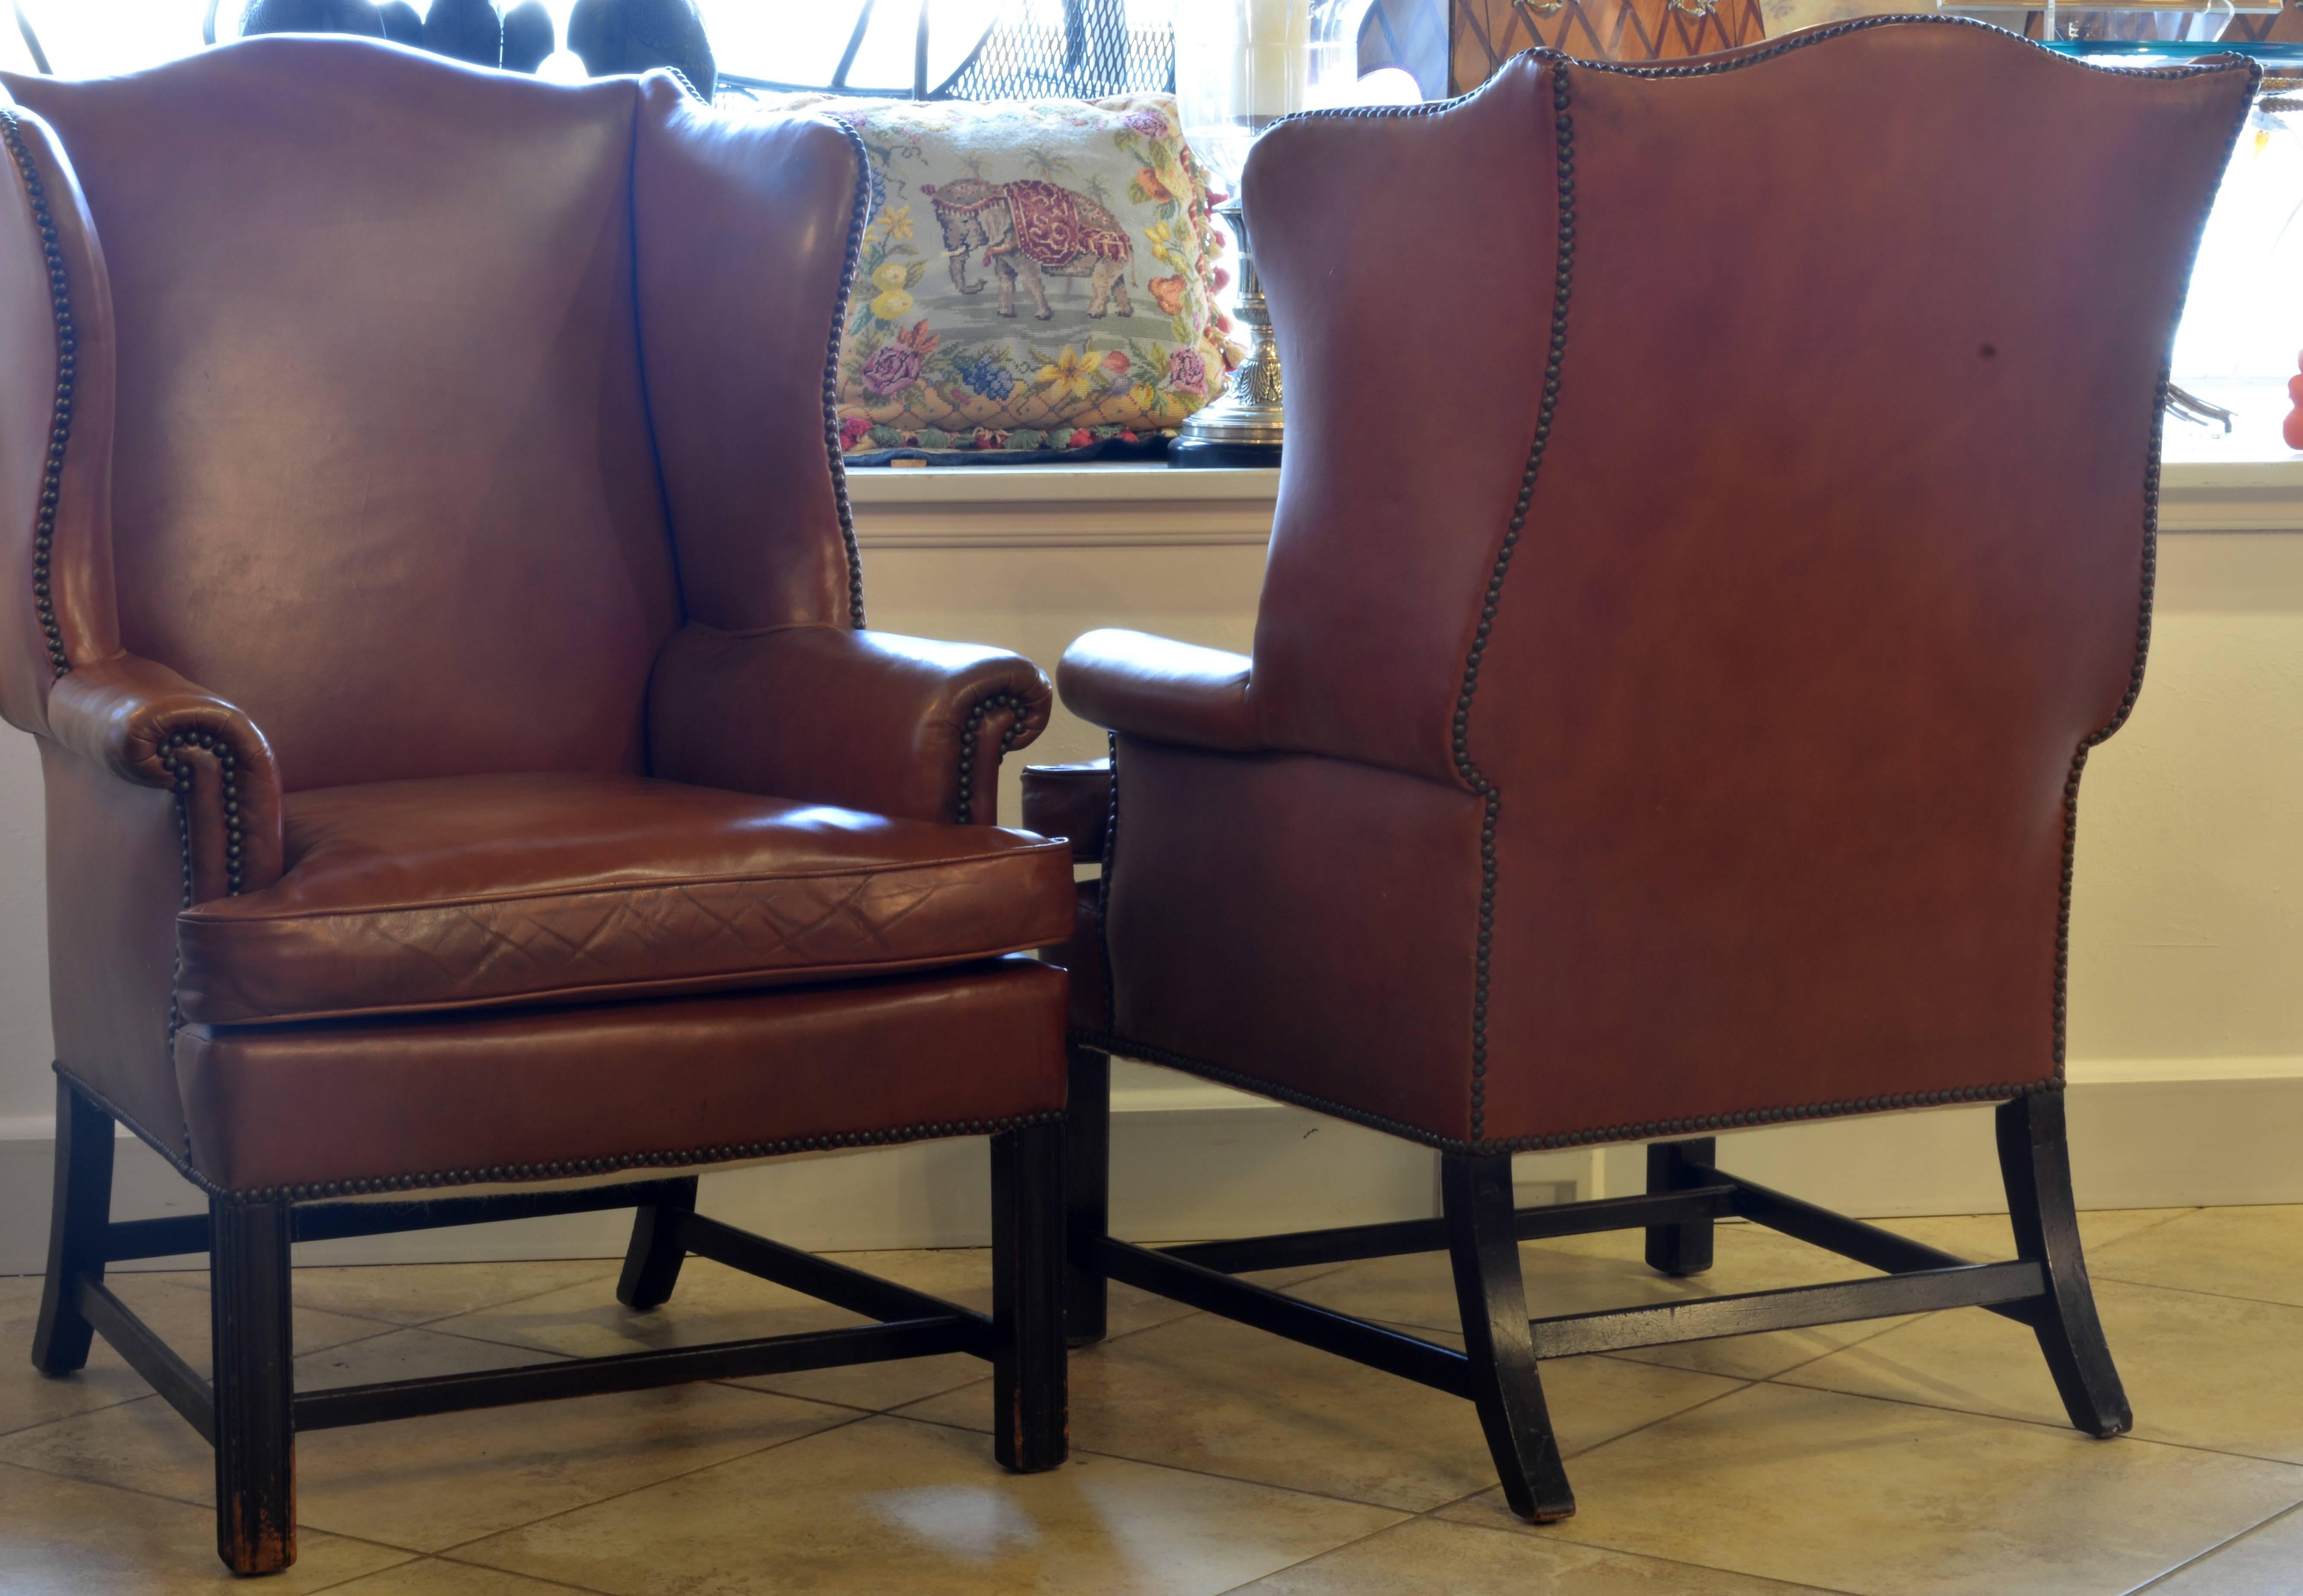 A pair of exquisite vintage Georgian style wing back leather armchairs. An iconic chair and ours are in great condition including the leather which has a nice color and texture.